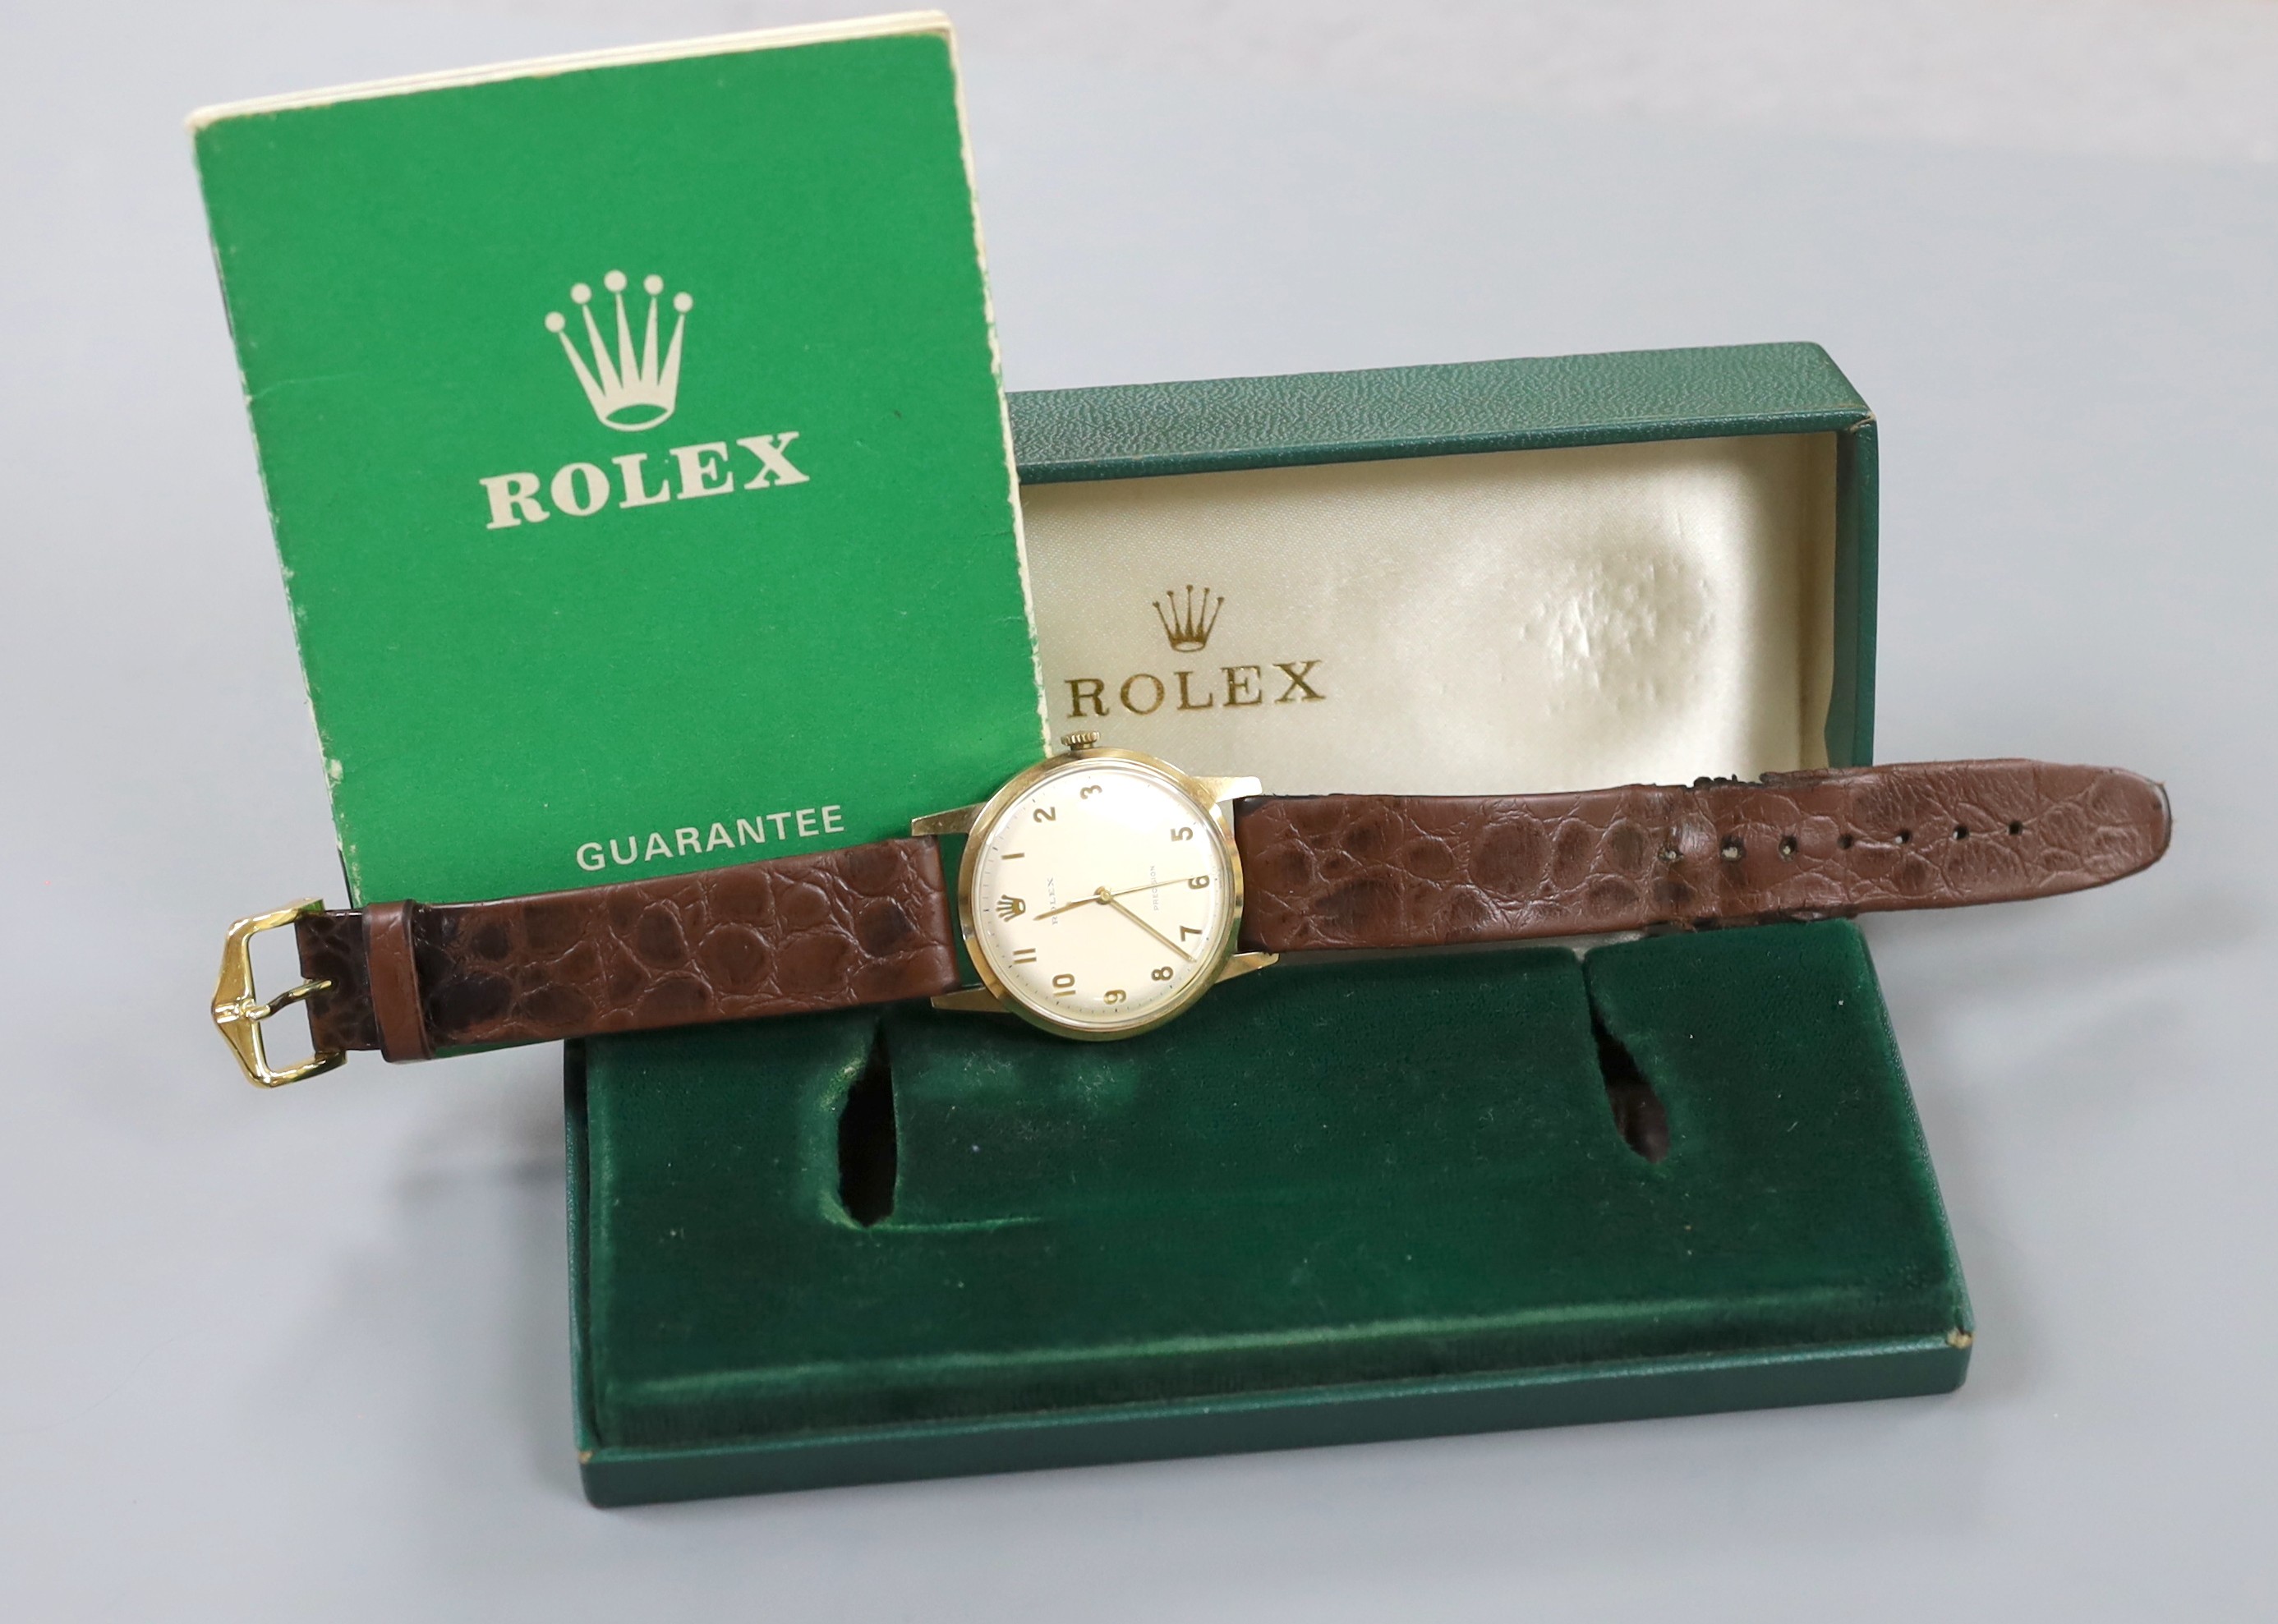 A gentleman's late 1960's 9ct gold Rolex precision manual wind wrist watch, with case back inscription, on associated leather strap, case diameter 34mm, gross weight 33.6 grams, with box and guarantee.